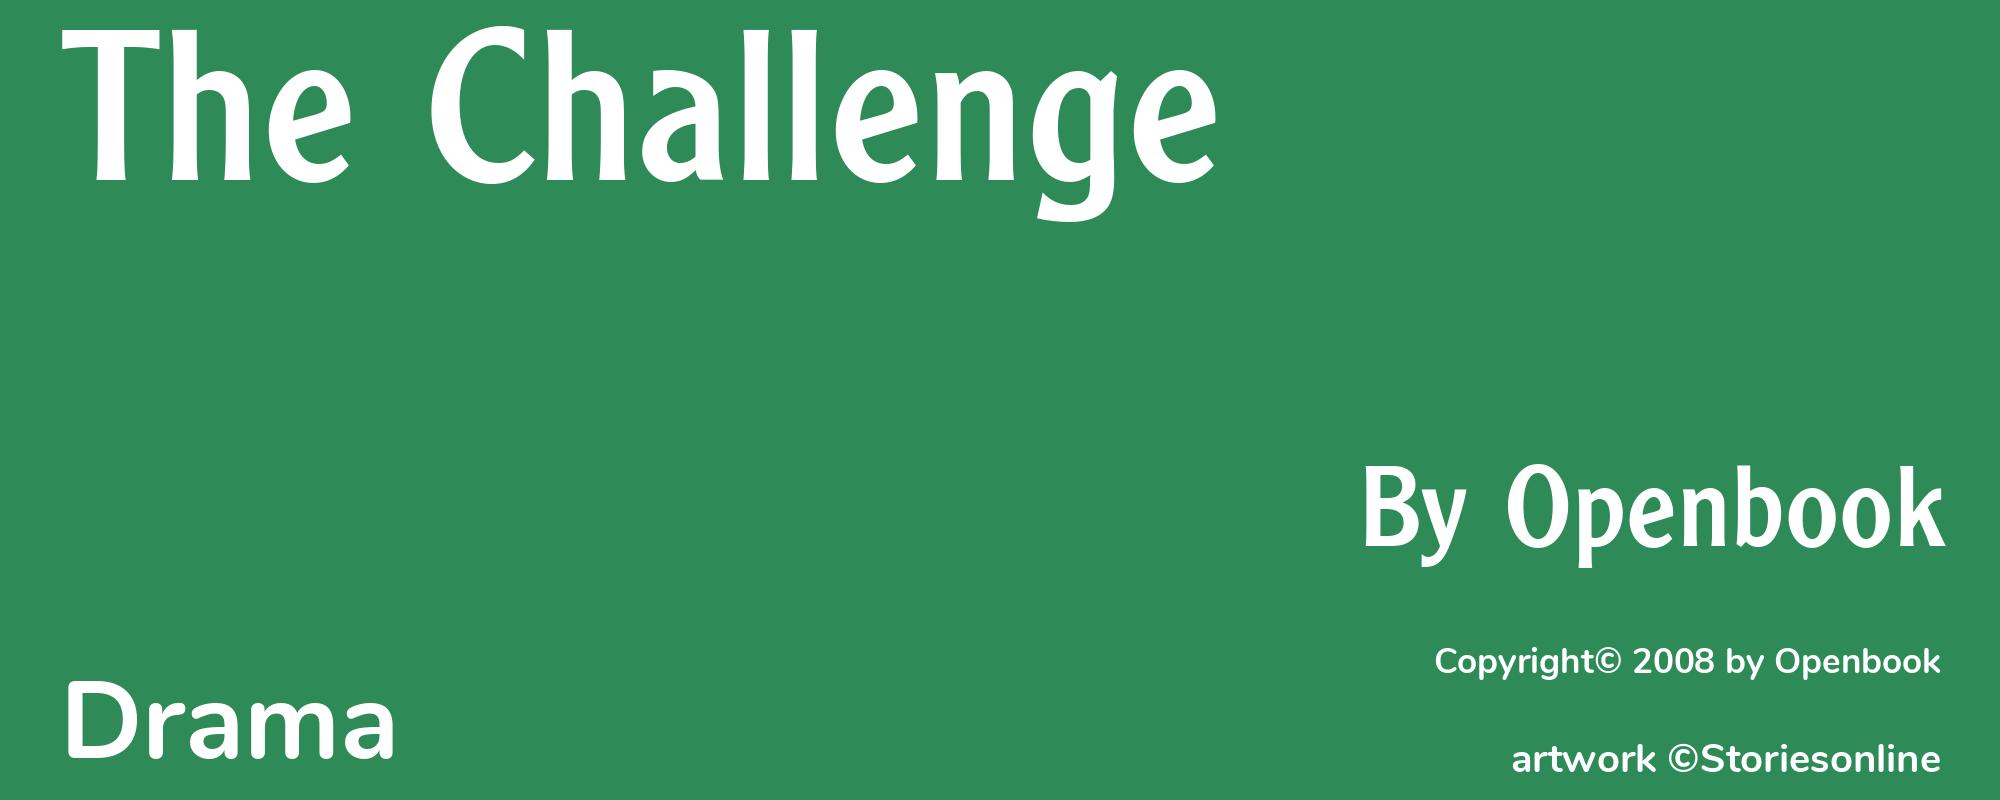 The Challenge - Cover